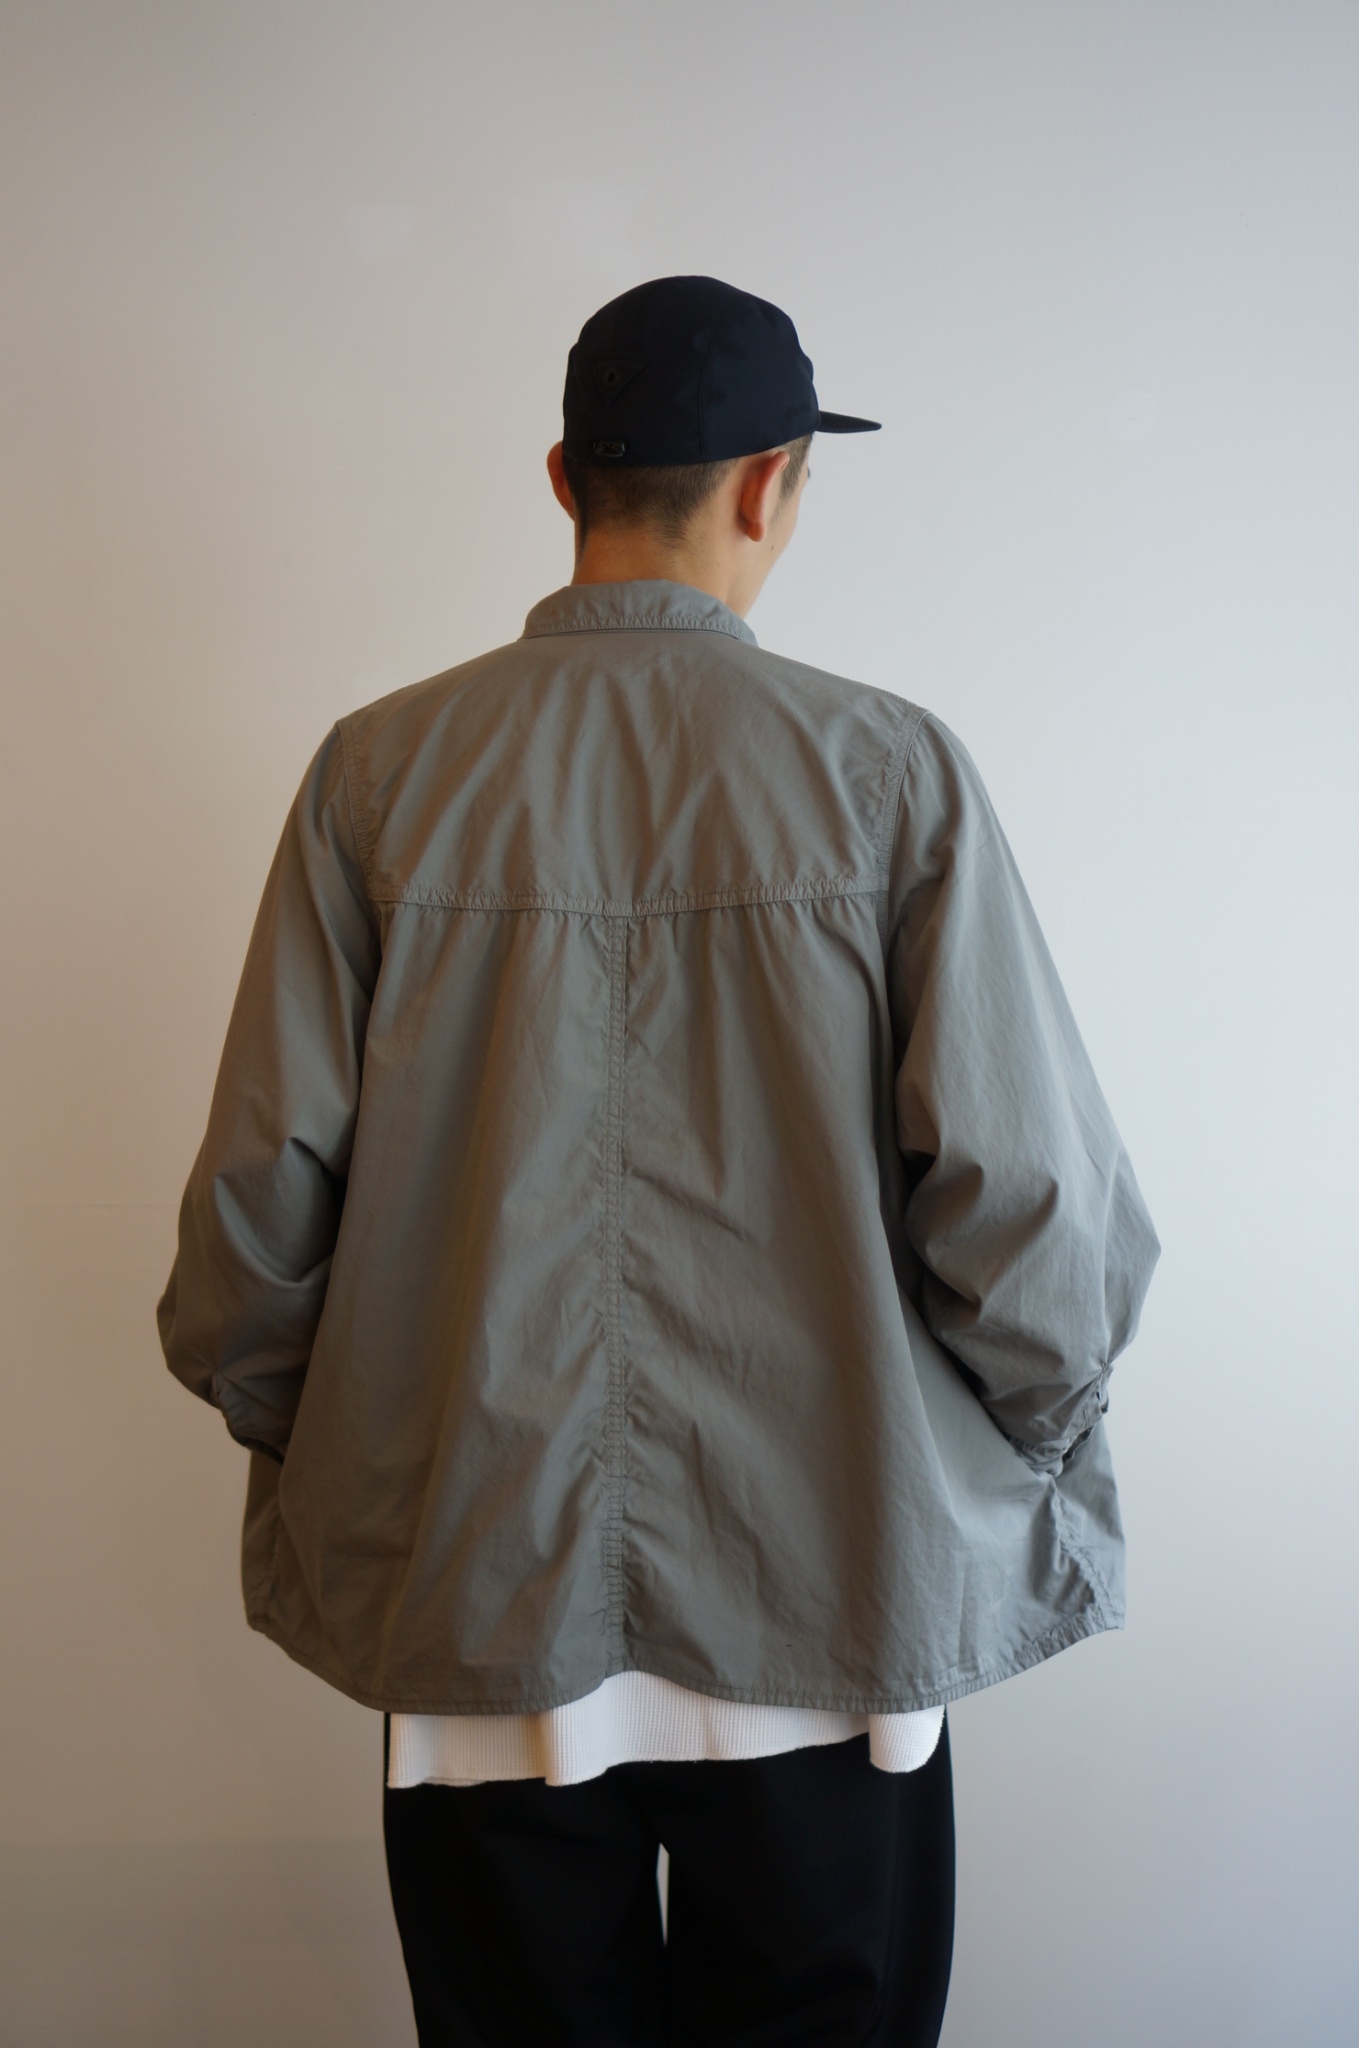 NEW ITEM “Graphpaper” | THE GROUND depot.【NEWS】